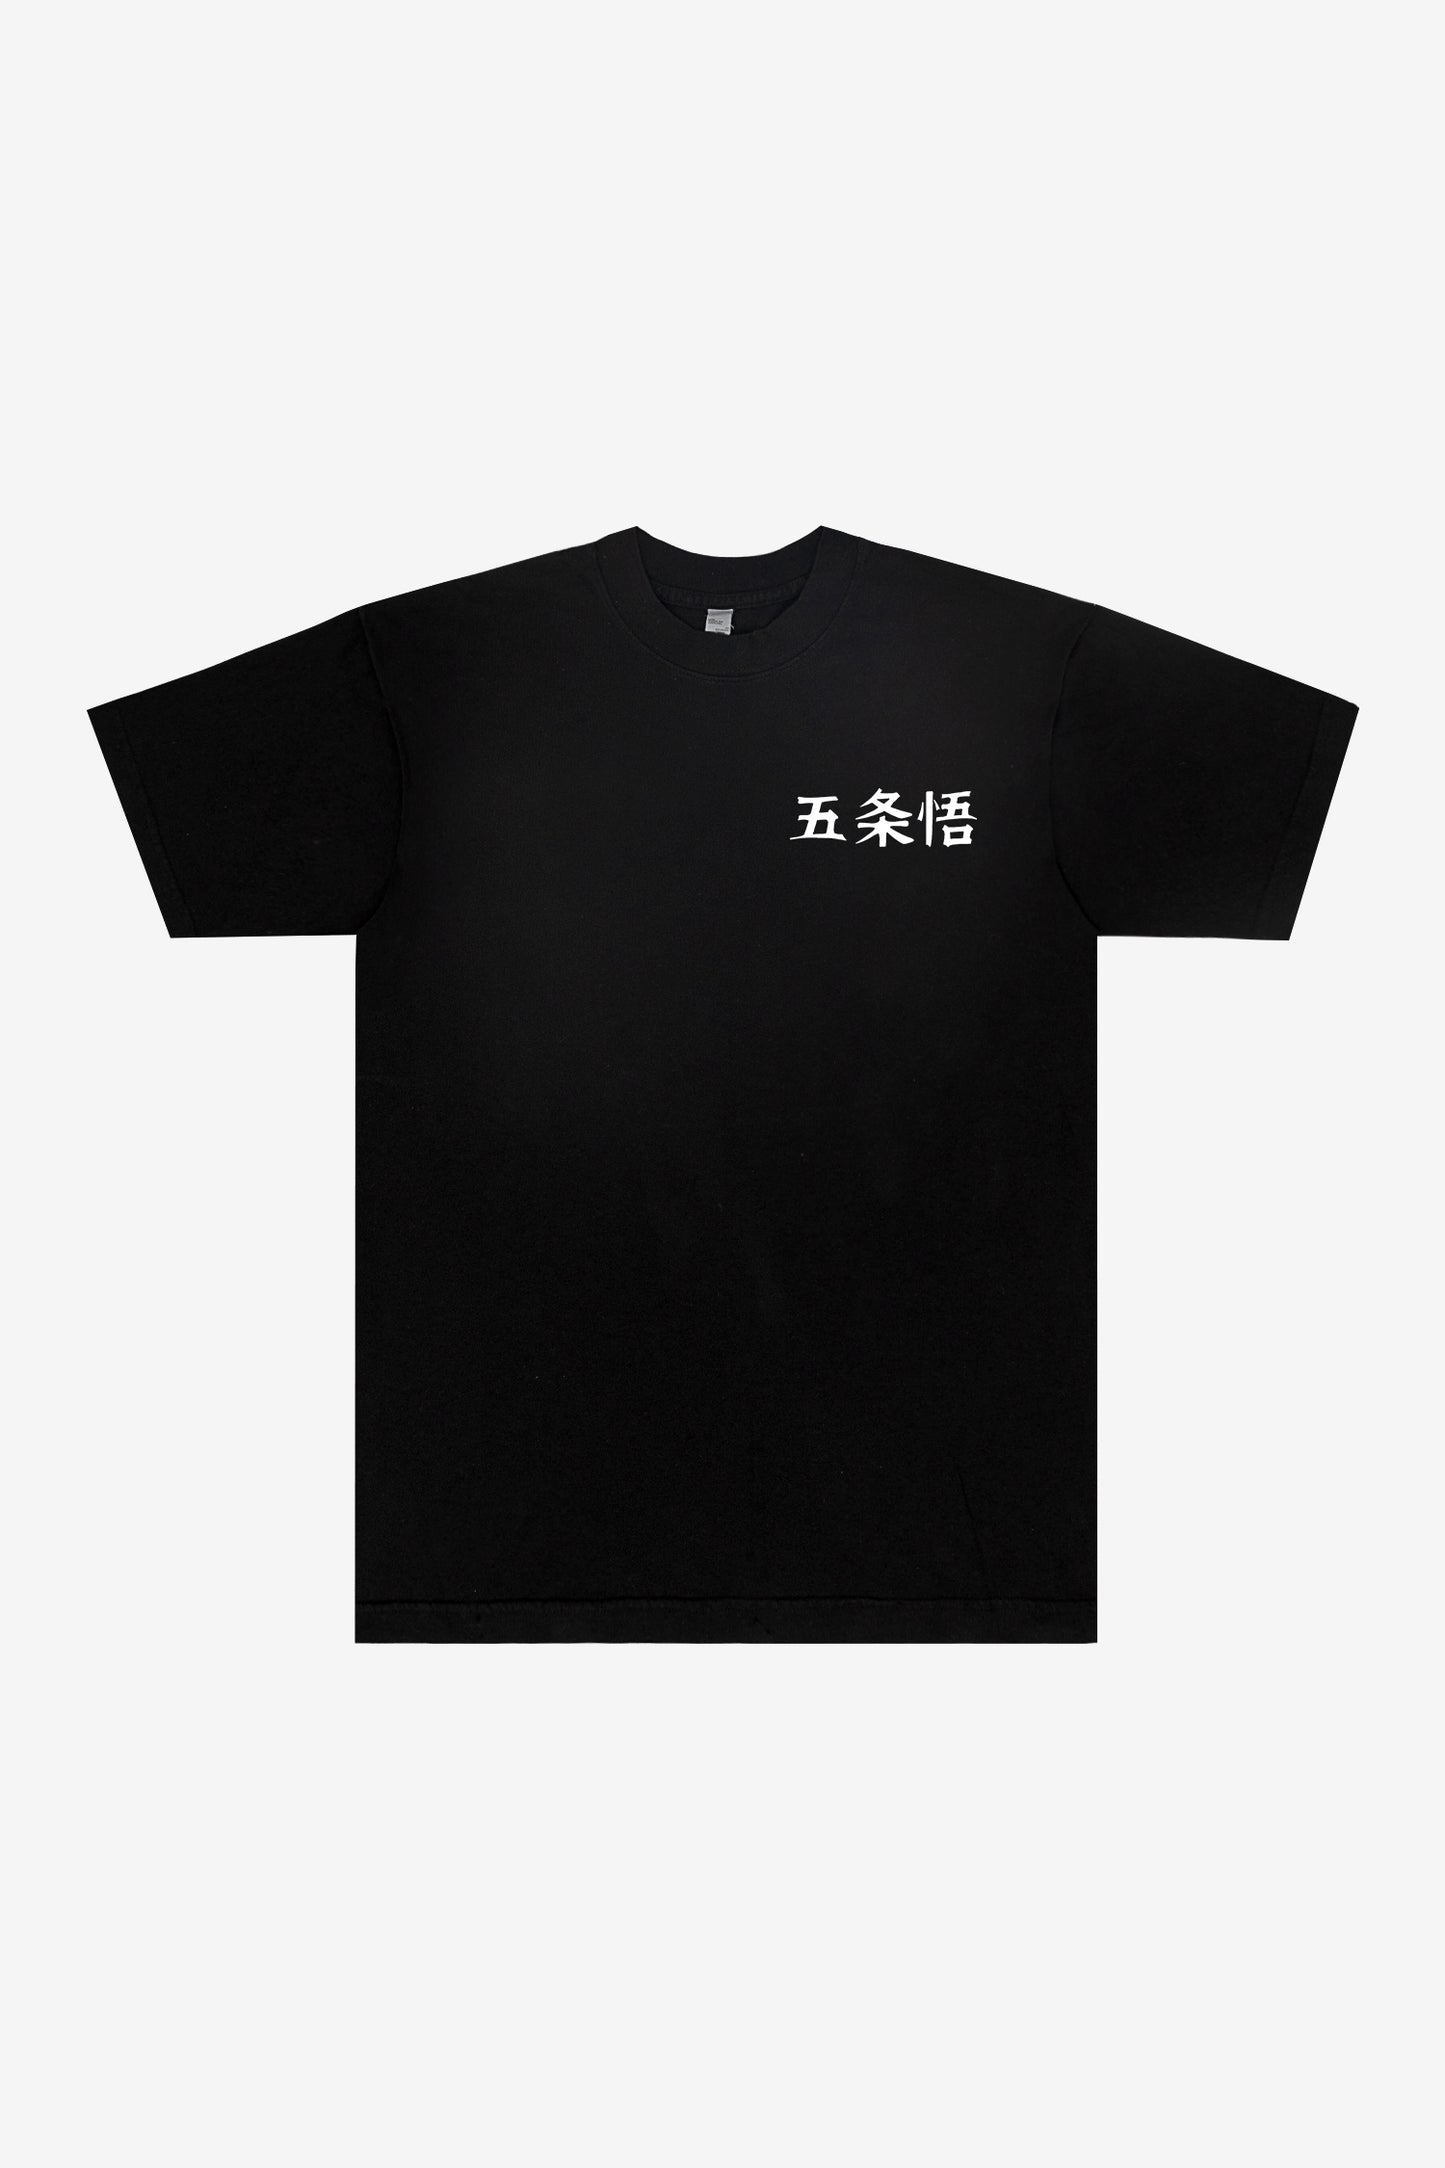 Gojo's Unlimited Void T-shirt